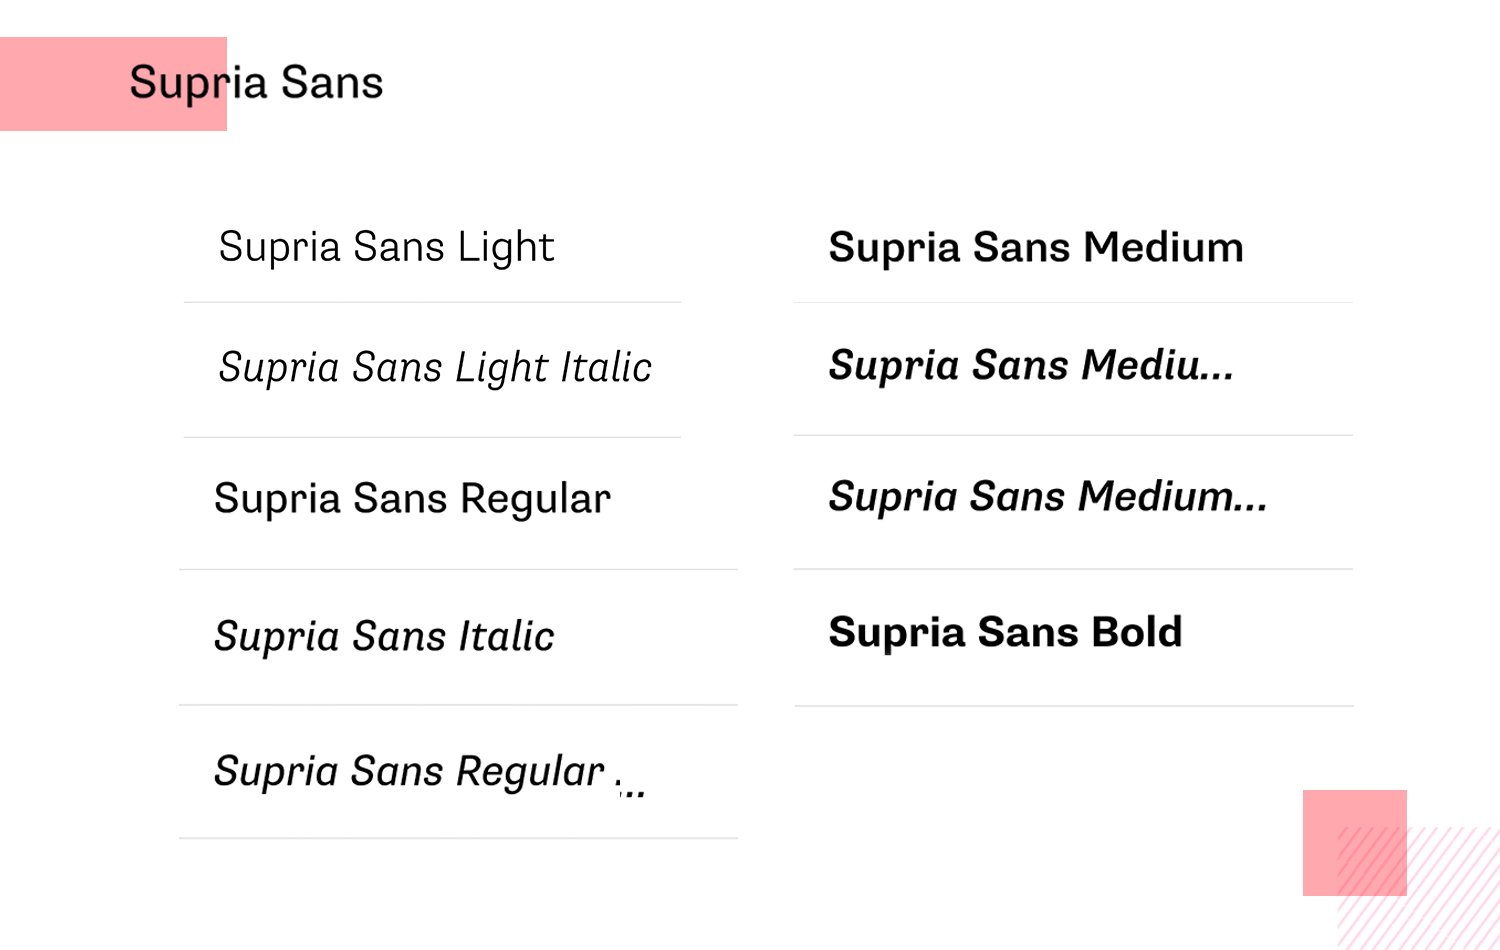 Supria Sans font variations in regular and bold styles